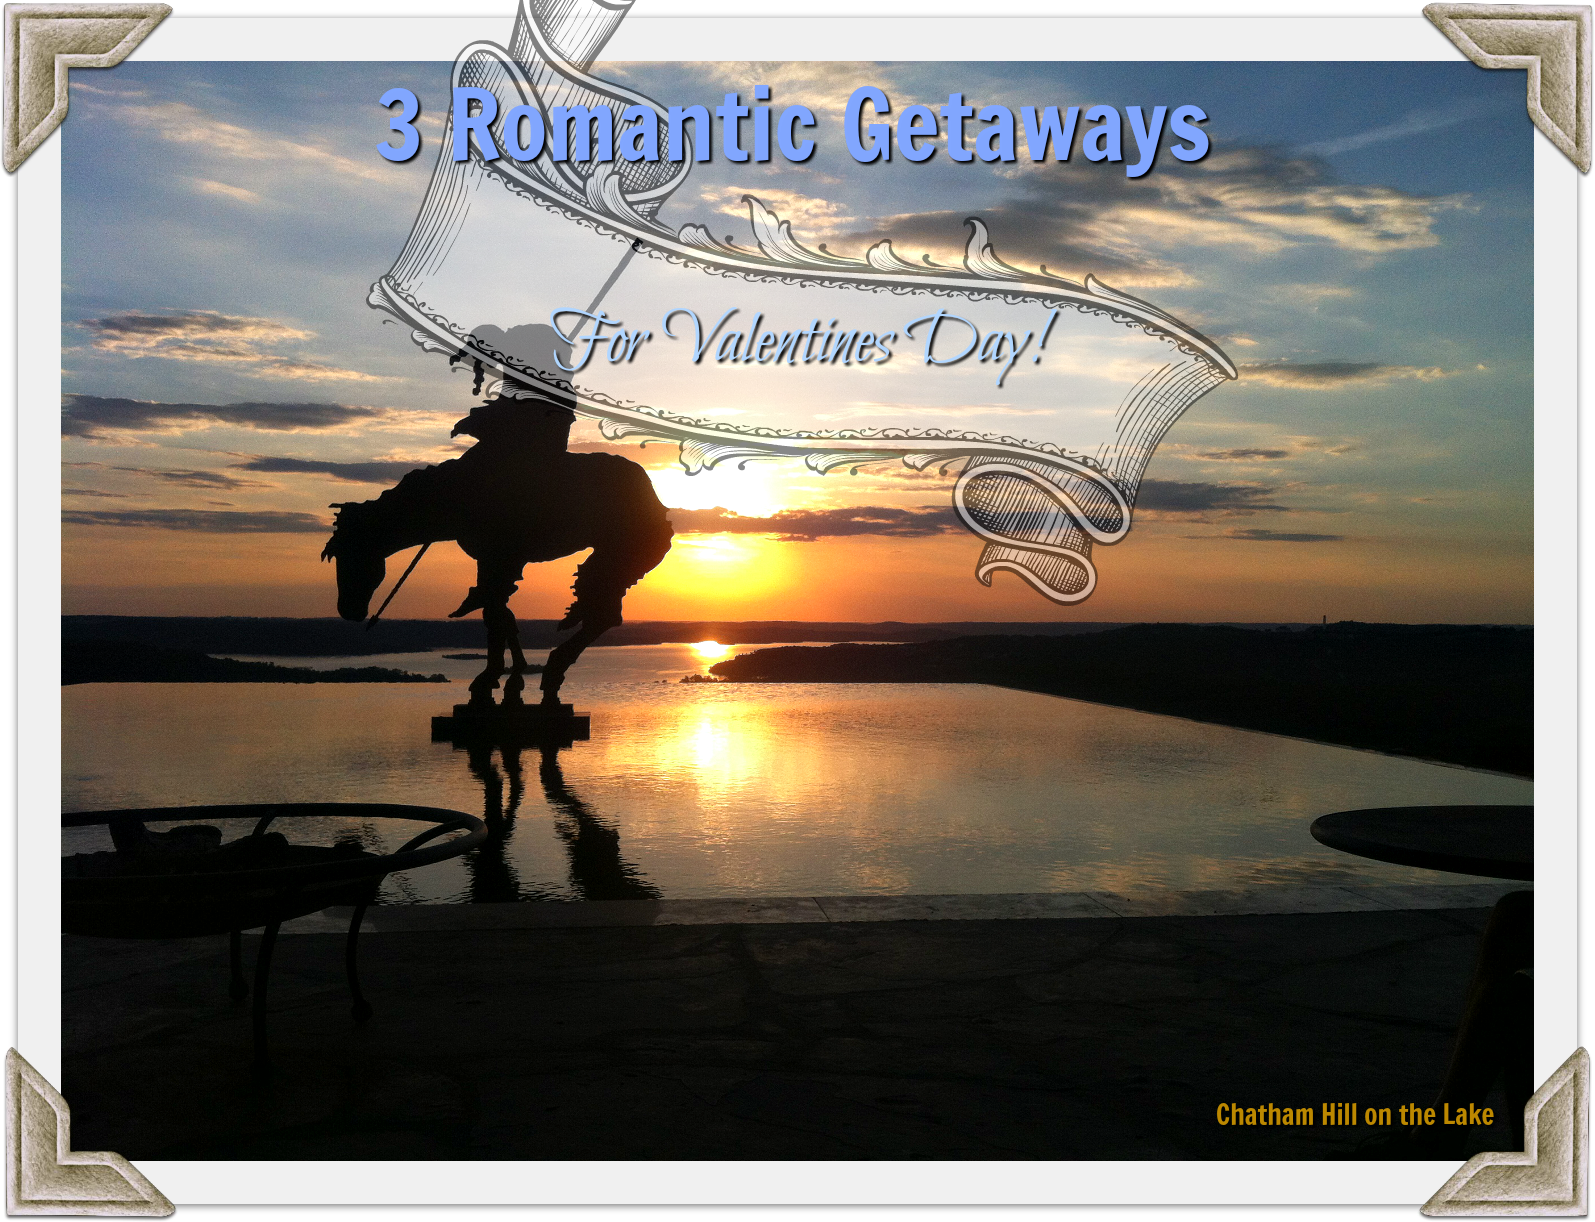 3 Romantic Getaways for Valentines Day at ChathamHillonthelake.com